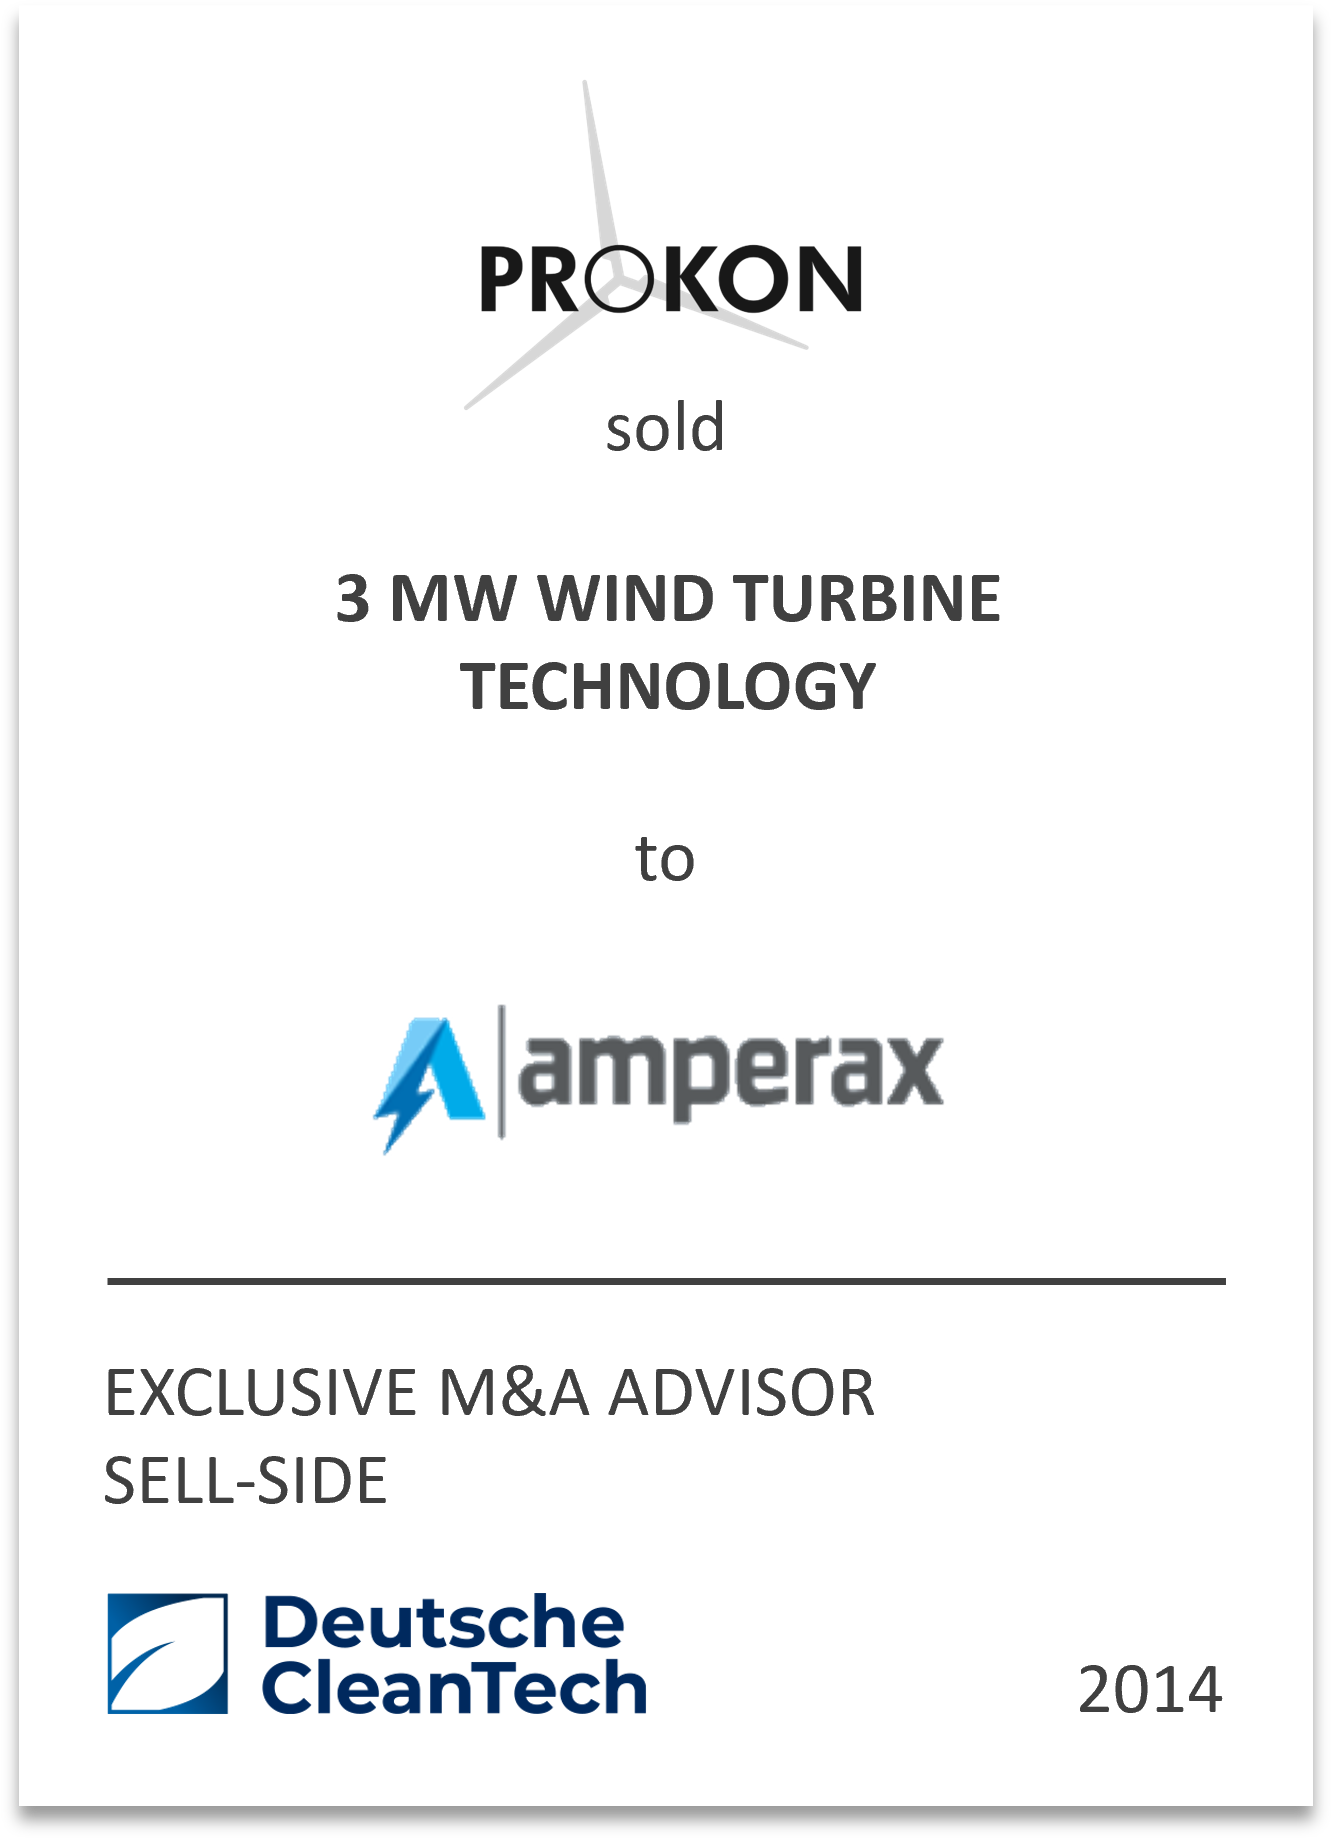 Amperax Energie GmbH acquired the P3000 wind turbine technology to partly manufacture turbines in Turkey and also to enter the Turkish market